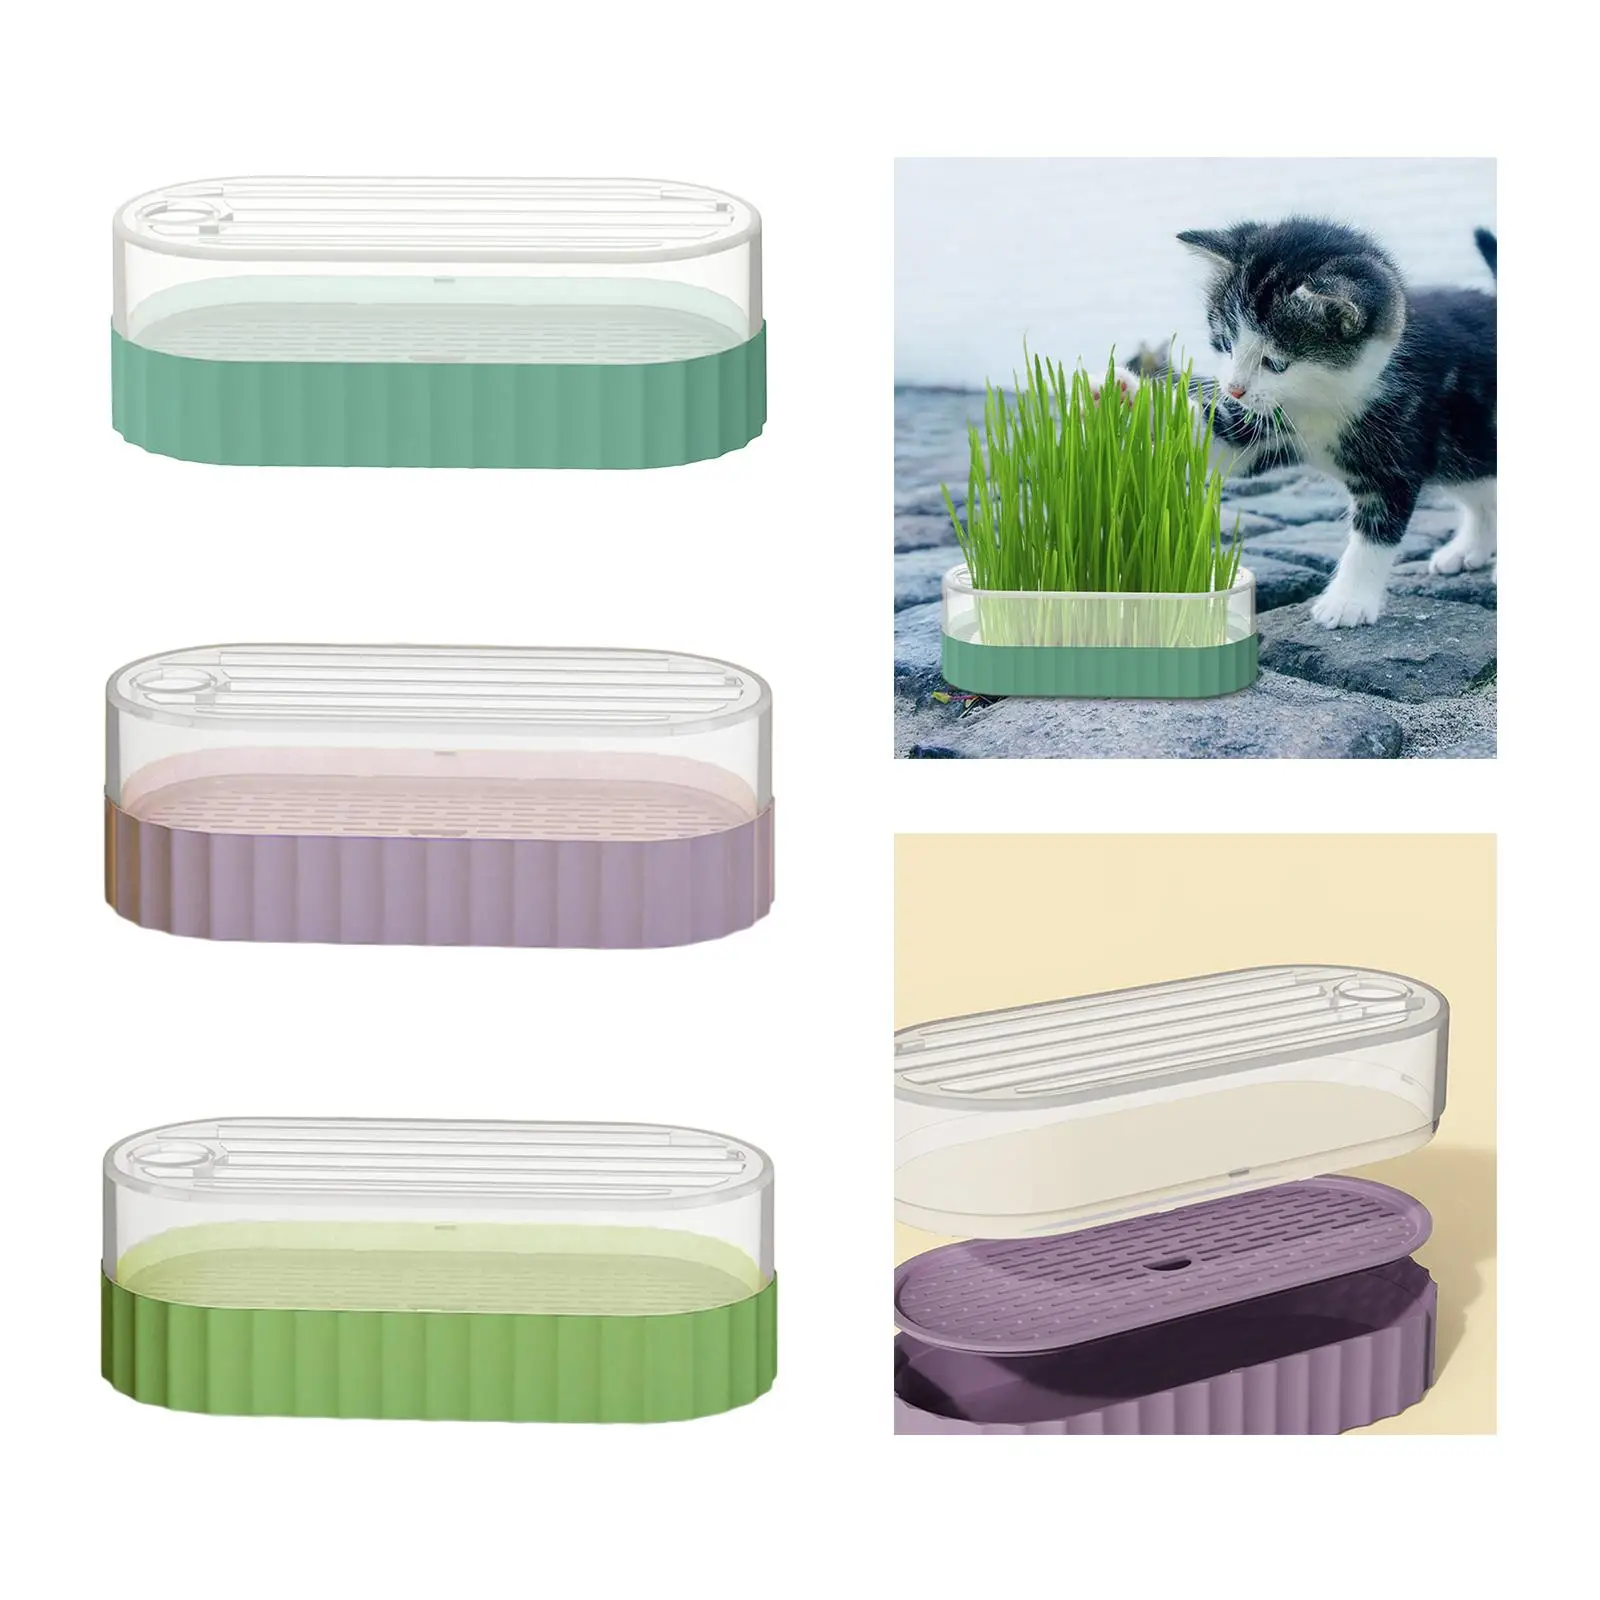 Plastic Seed Sprouter Tray for Garden Home Office Microgreens Sprouting Container Wheatgrass Grower Catnip Cultivation Box